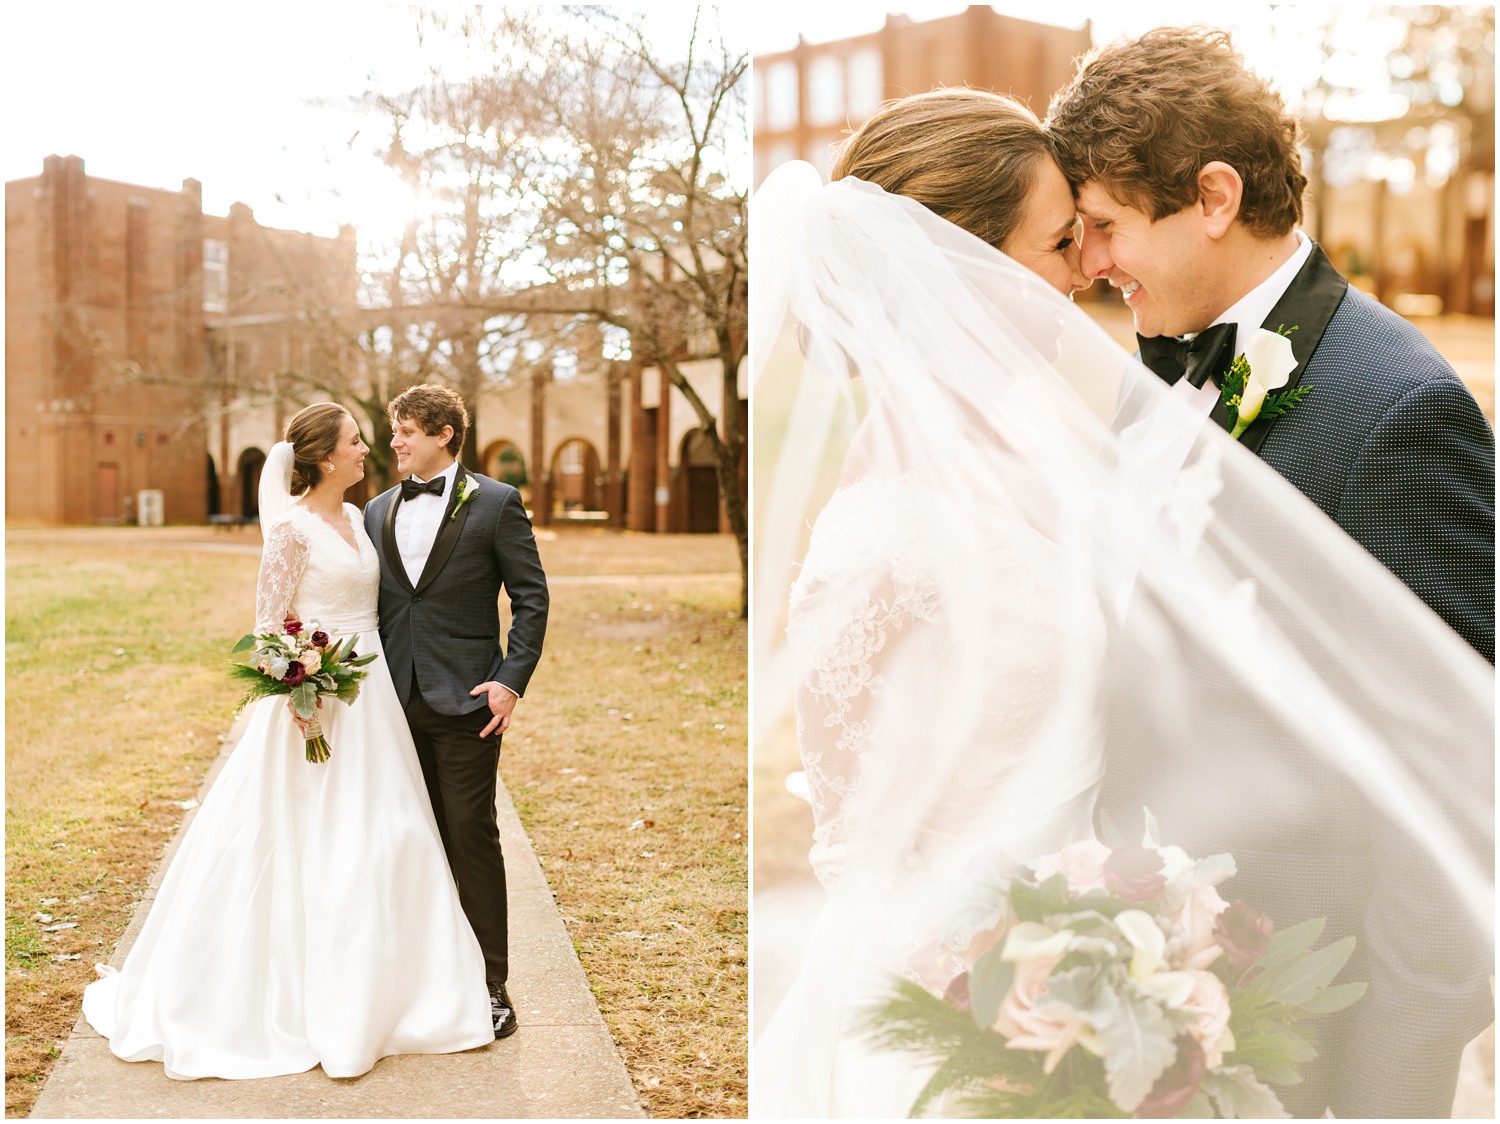 Chelsea Renay Photography photographs bride and groom under veil